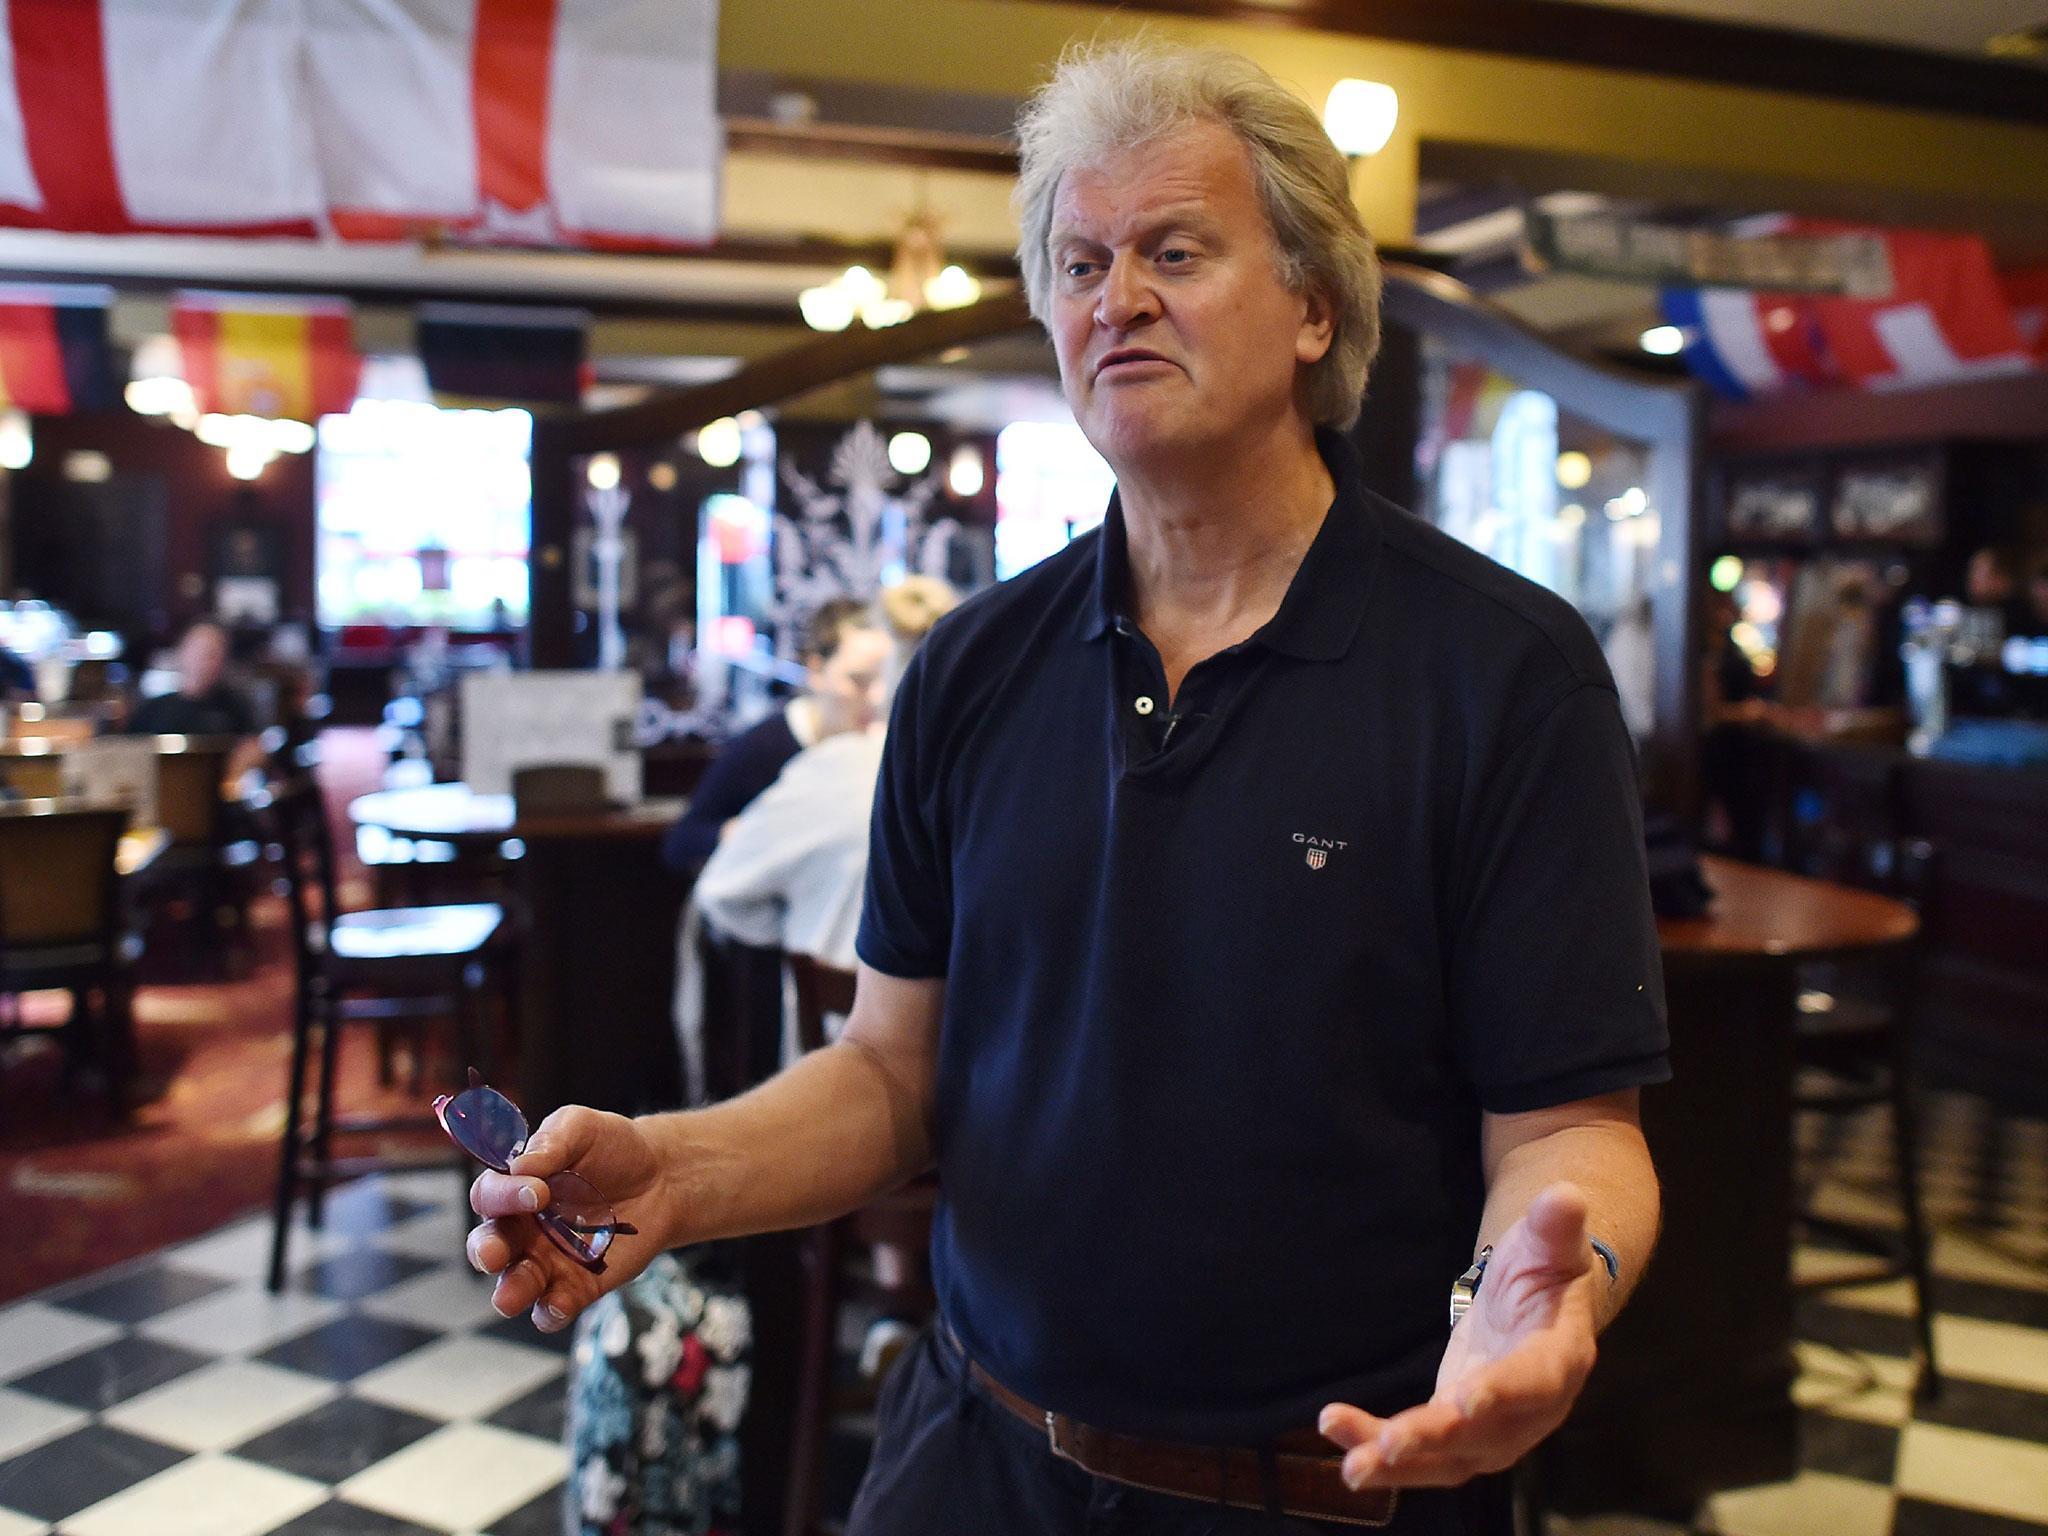 Tim Martin distributed 500,000 beer mats backing Brexit in the run-up to the EU referendum